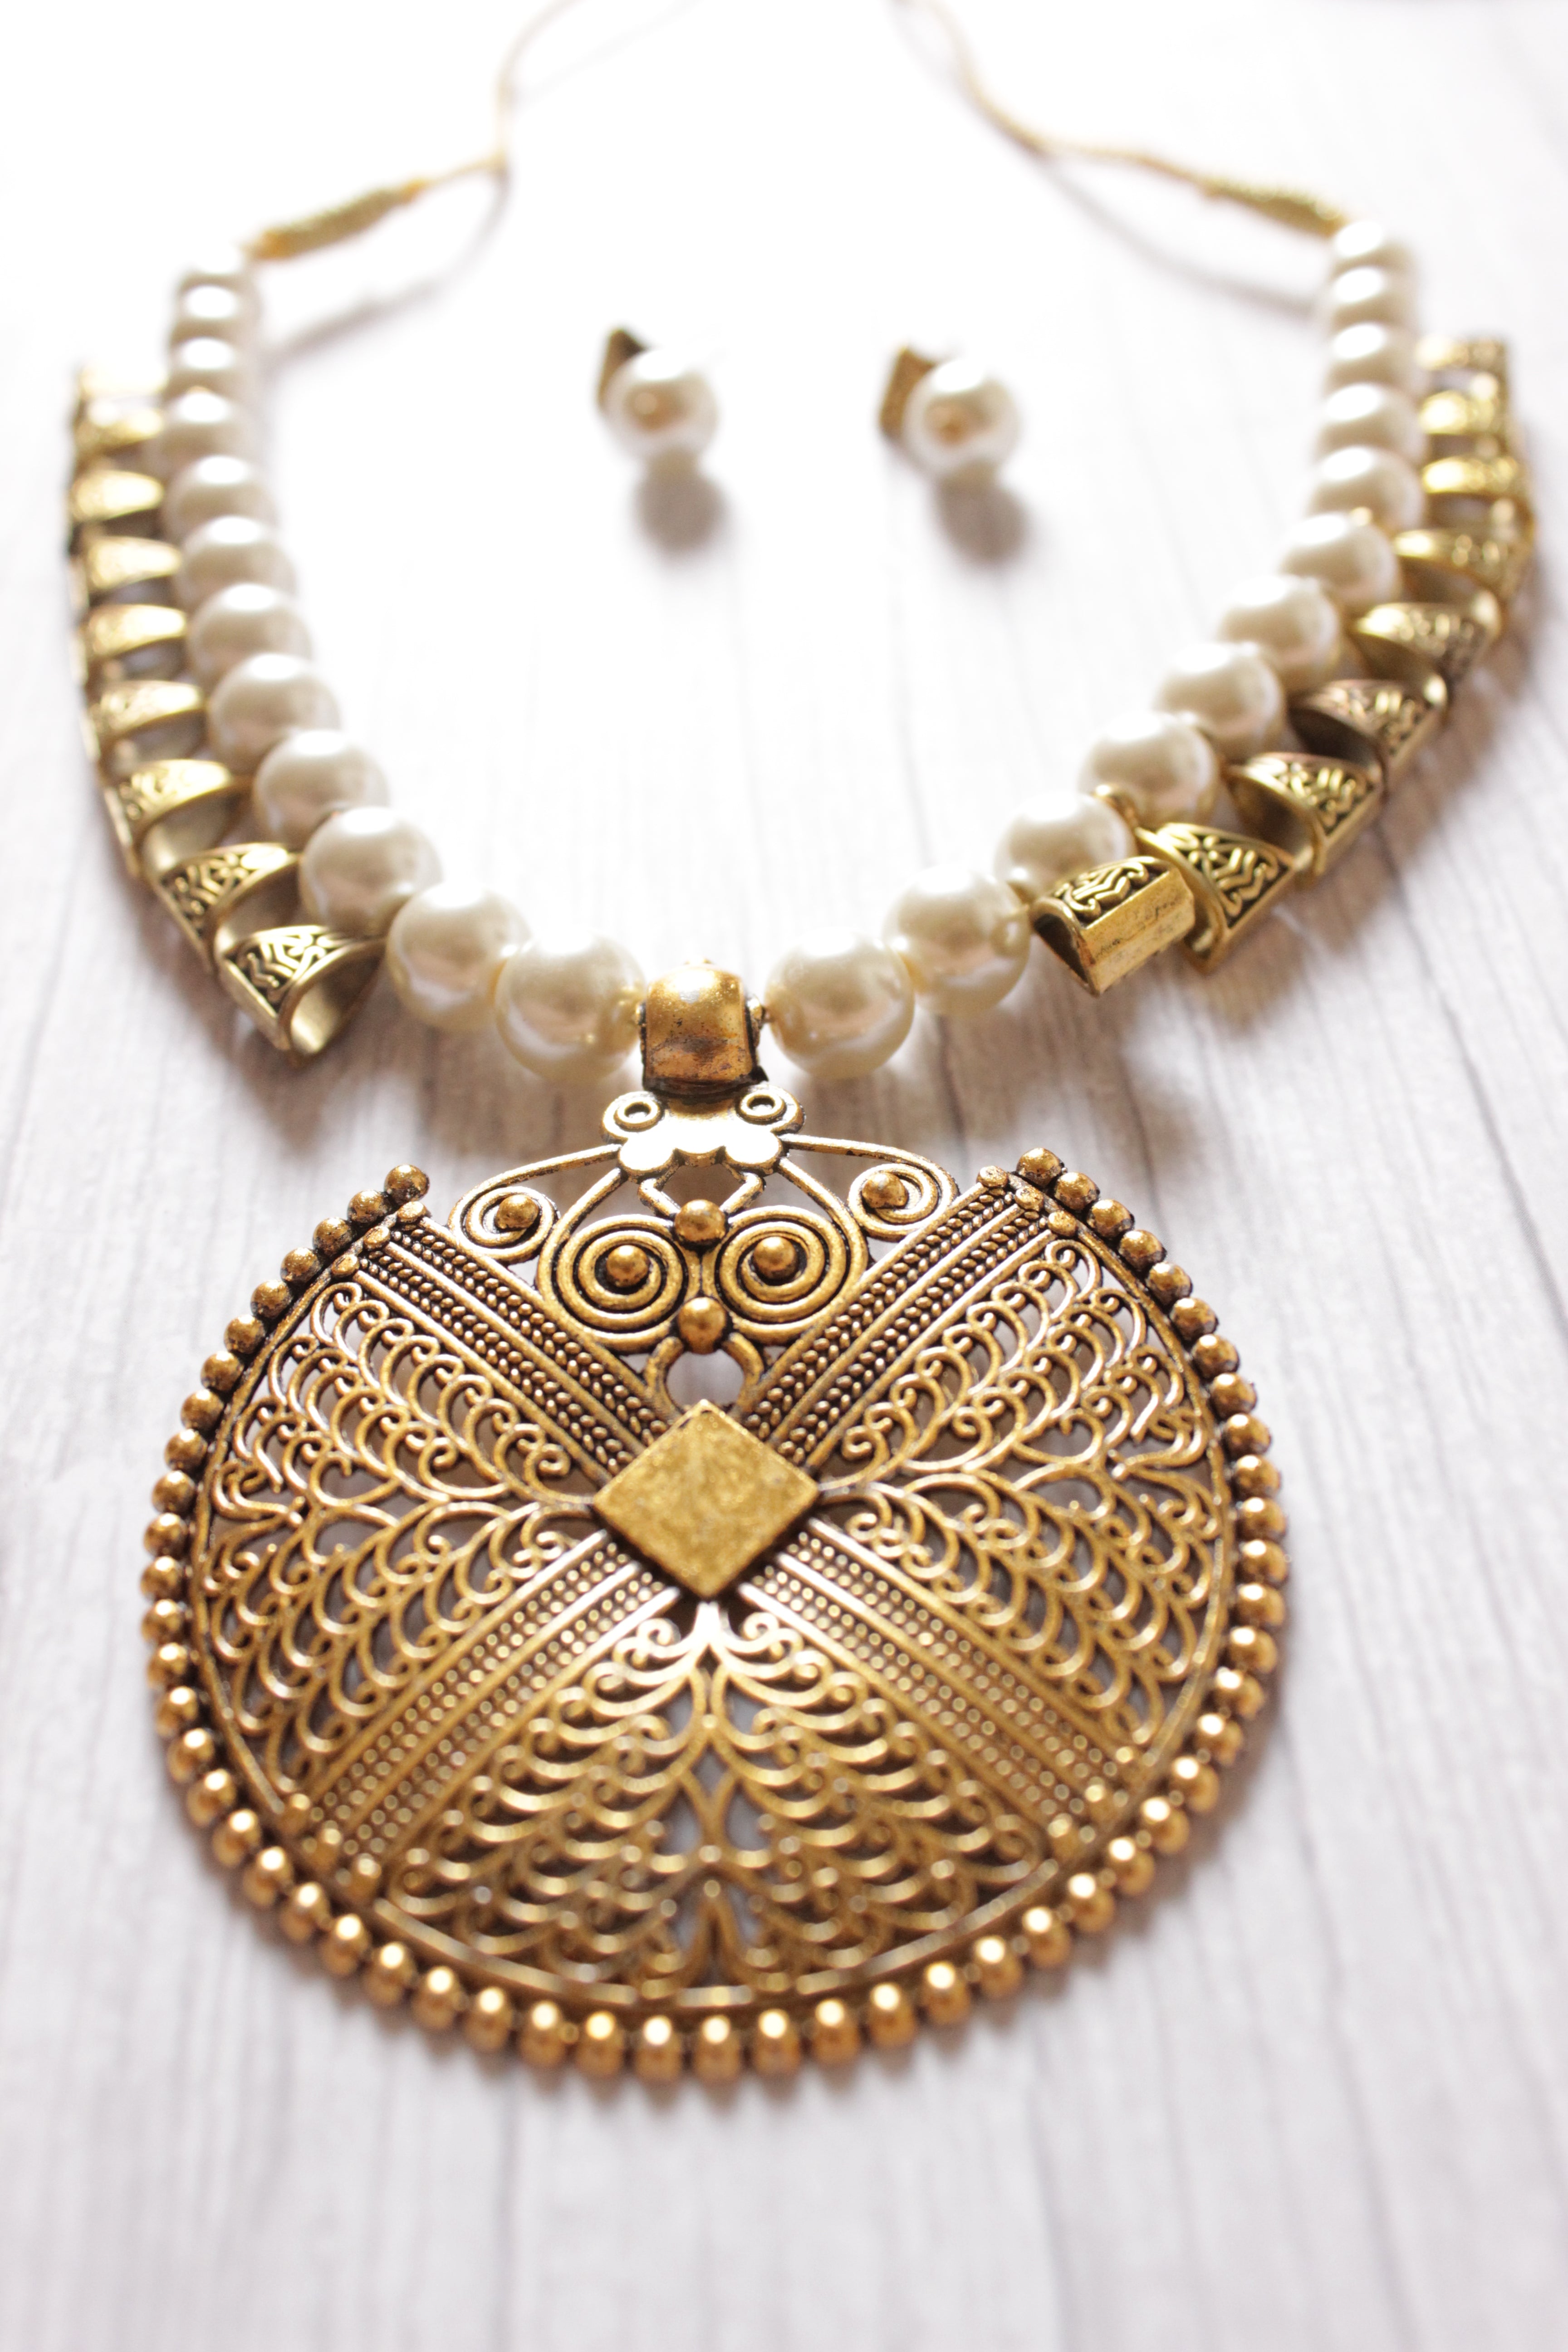 Gold-Toned White Pearl Necklace Set with Statement Pendant